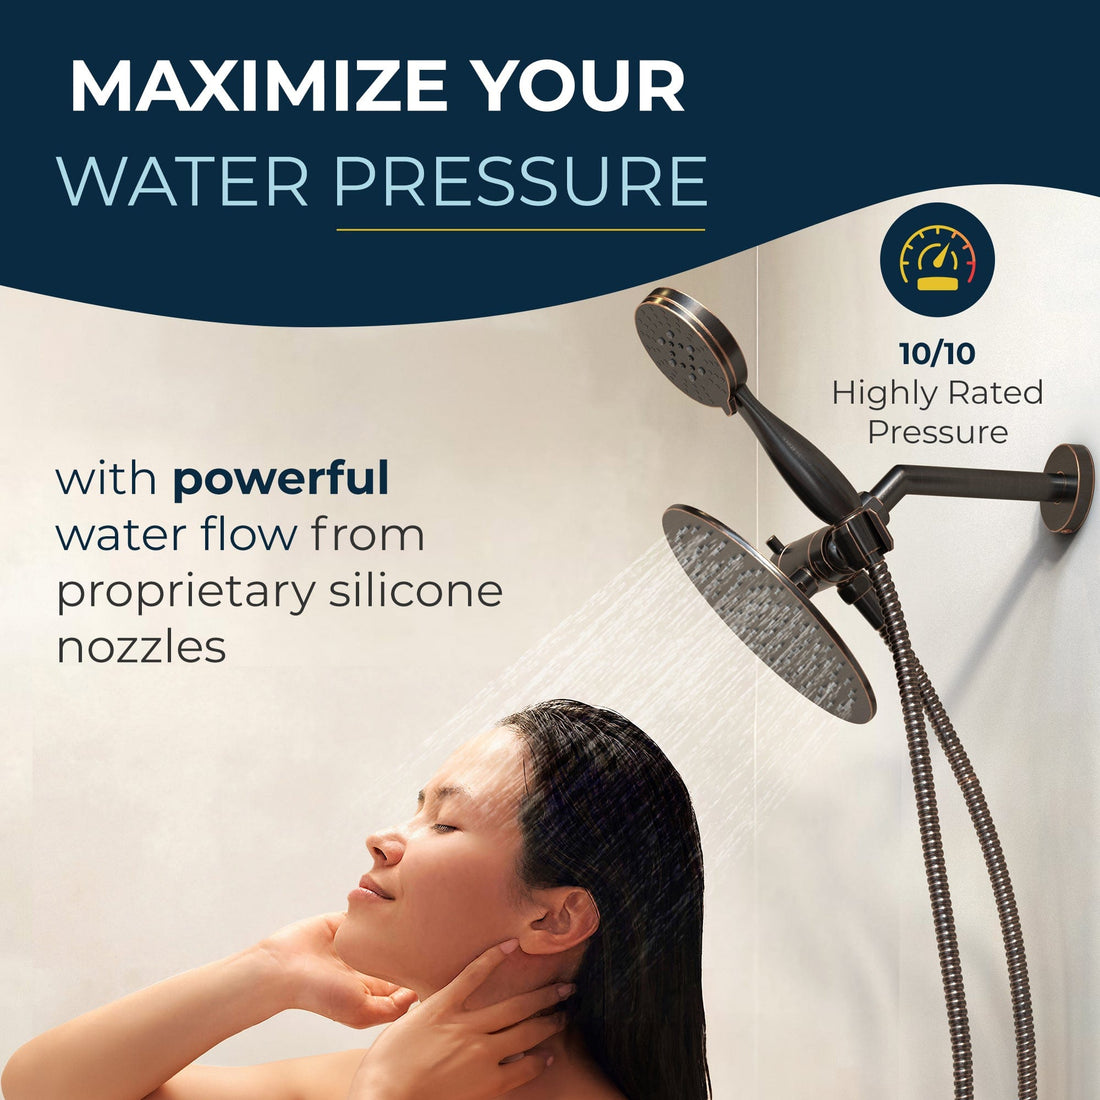 Maximize Your Water Pressure 3-Spray Dual Shower Head Oil Rubbed Bronze / 2.5 - The Shower Head Store